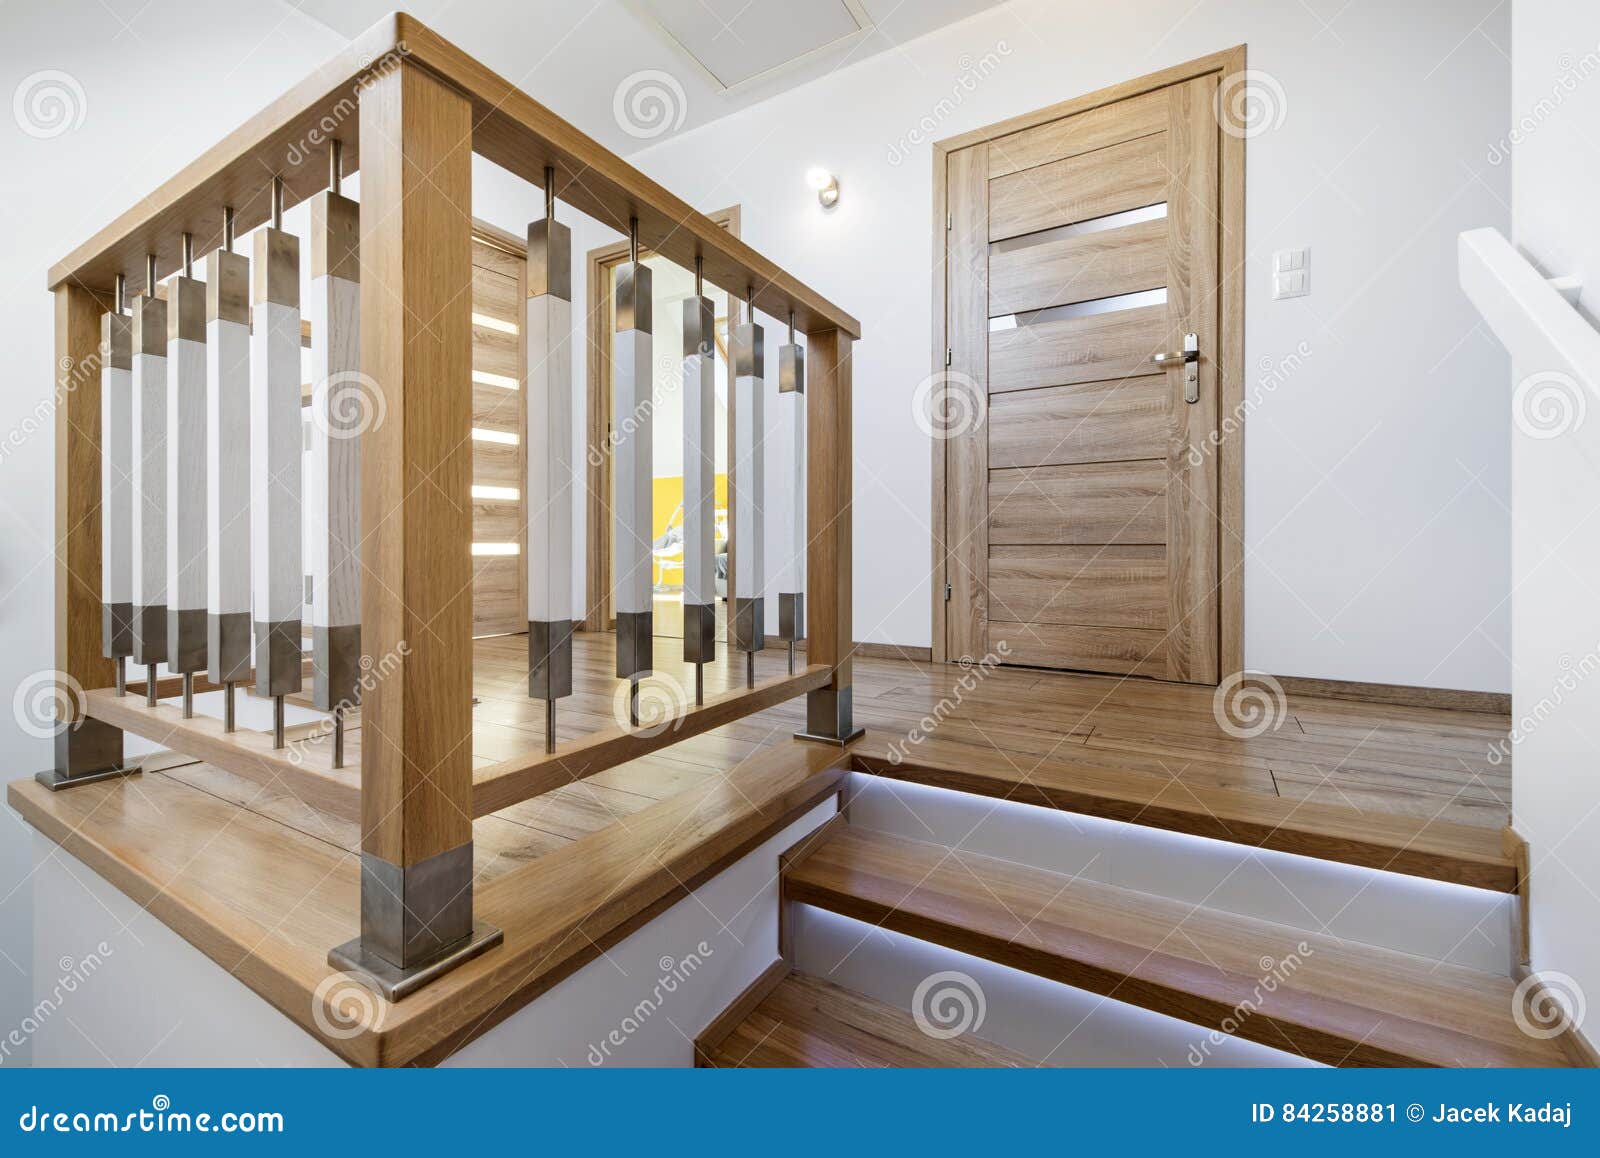 Modern Wooden Stair Way Stock Image Image Of Furniture